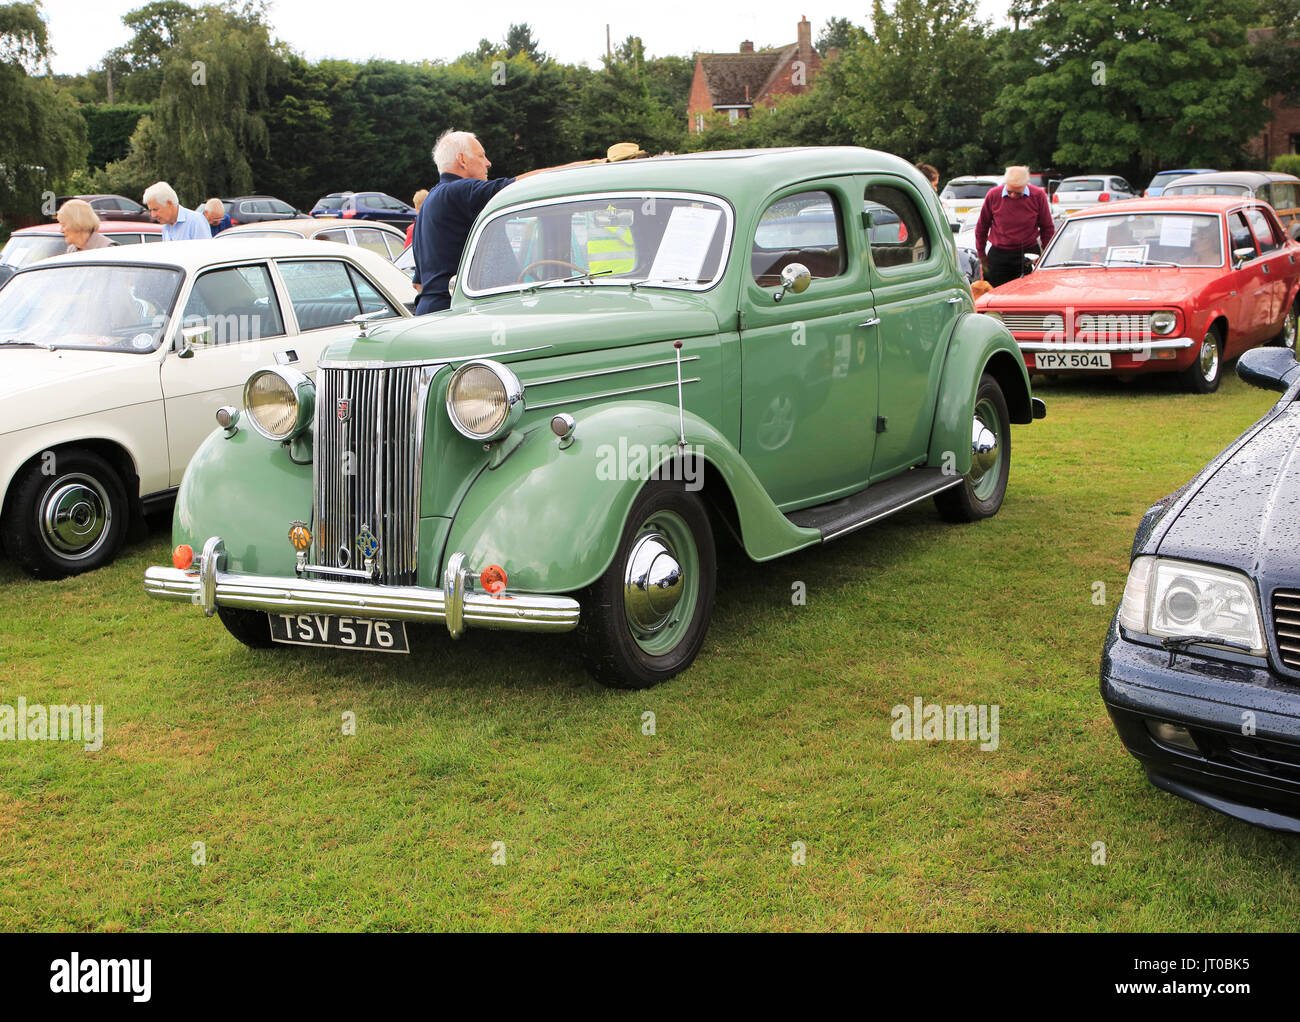 Ford V8 Pilot car at classic vintage vehicle rally at summer fete car ...